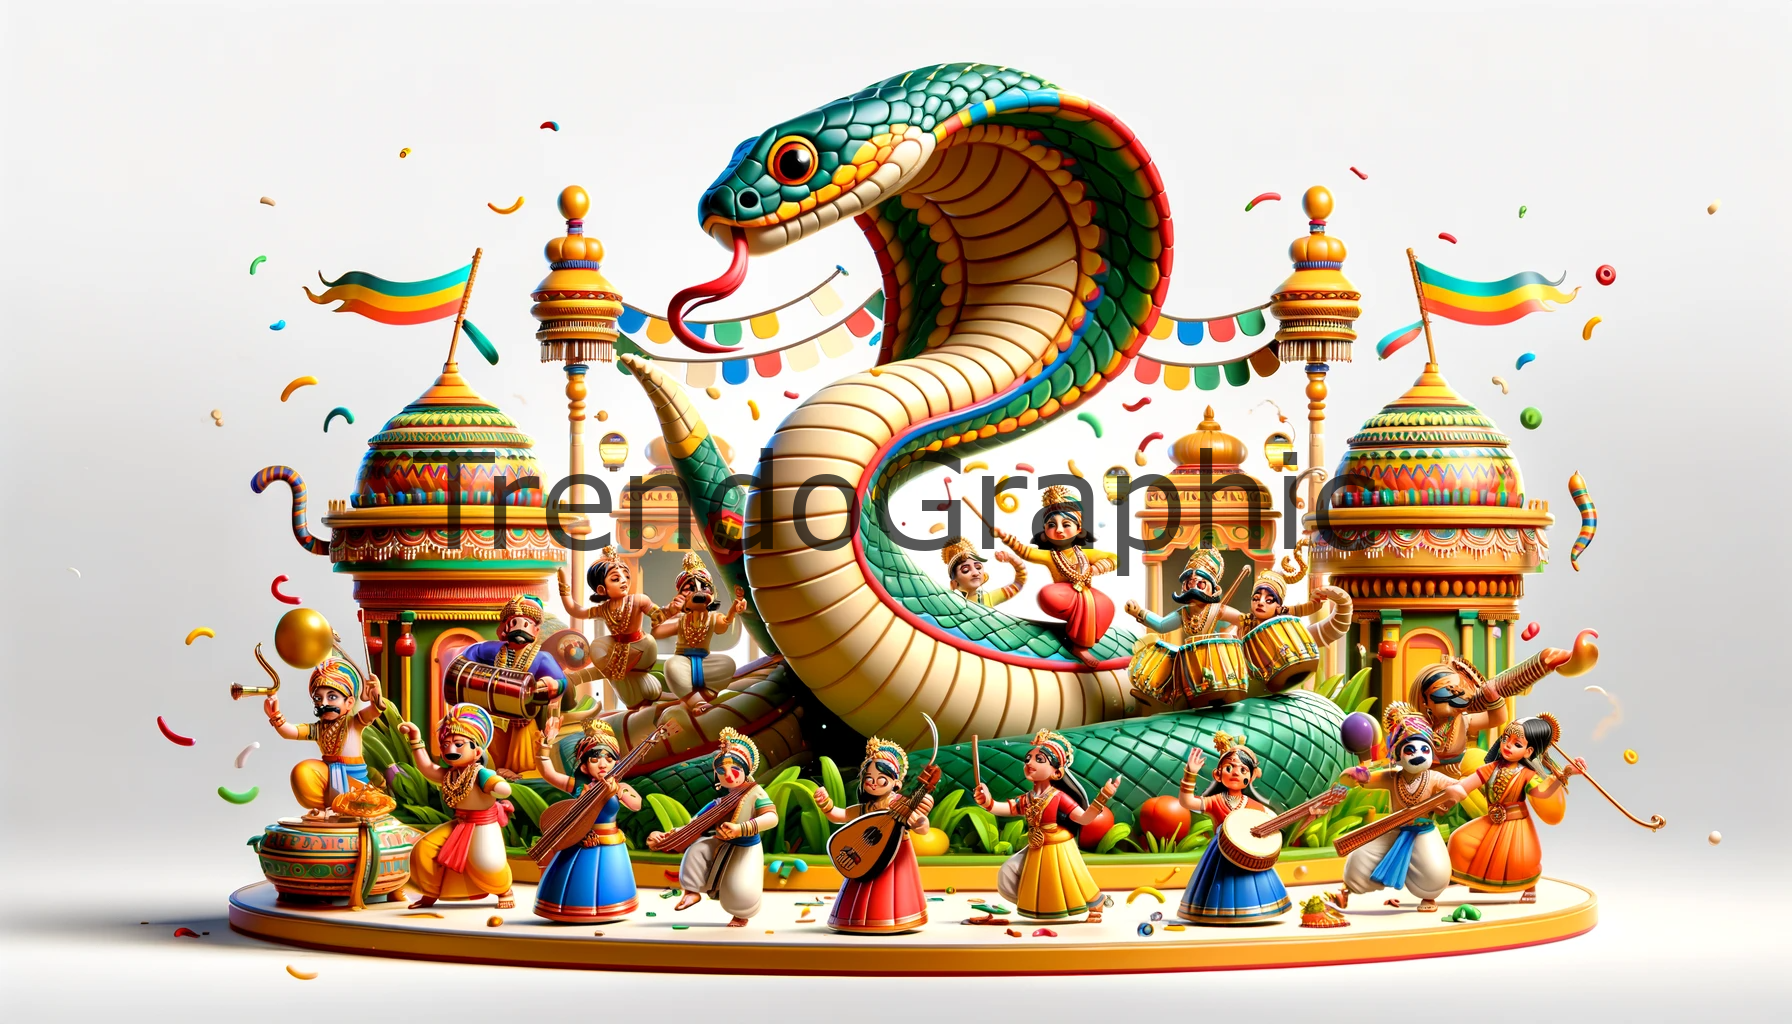 Celebrating Culture: The Significance of Snakes in Festivals